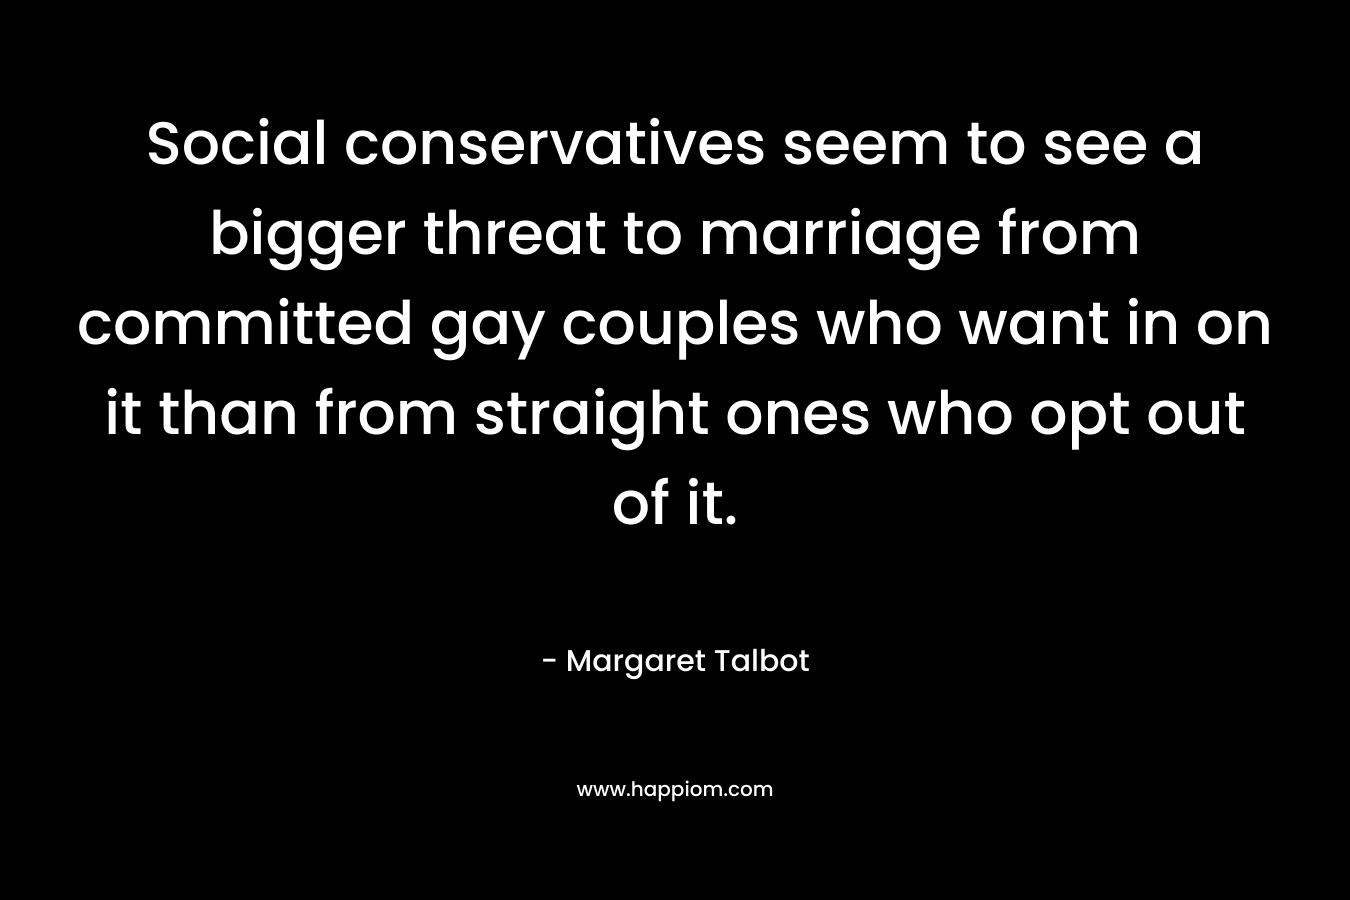 Social conservatives seem to see a bigger threat to marriage from committed gay couples who want in on it than from straight ones who opt out of it. – Margaret Talbot